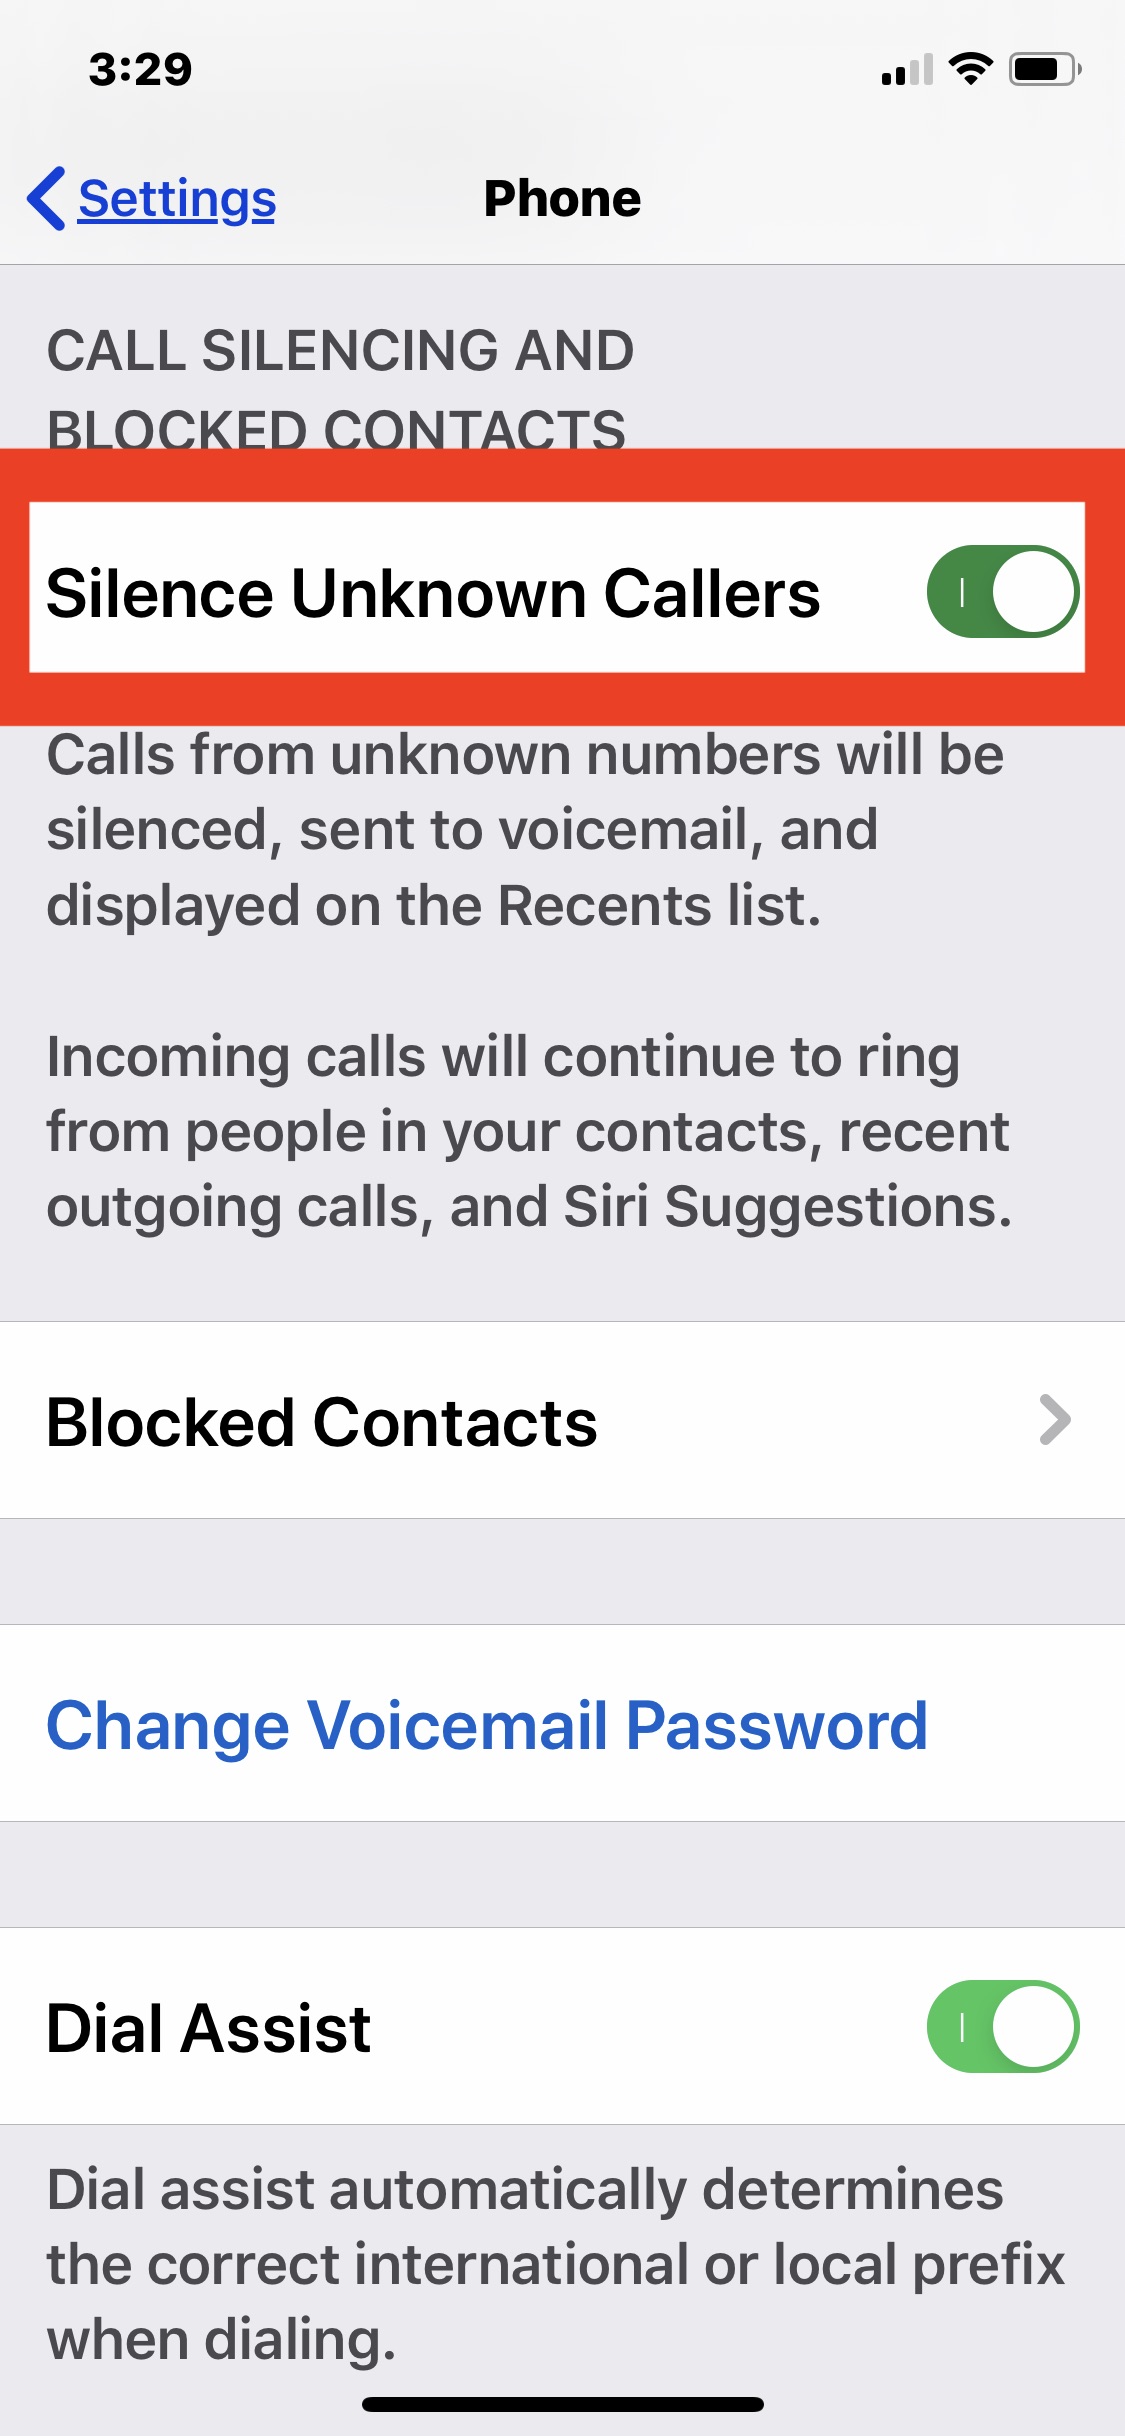 How to Stop Spam Calls on iPhone with Silence Unknown Callers